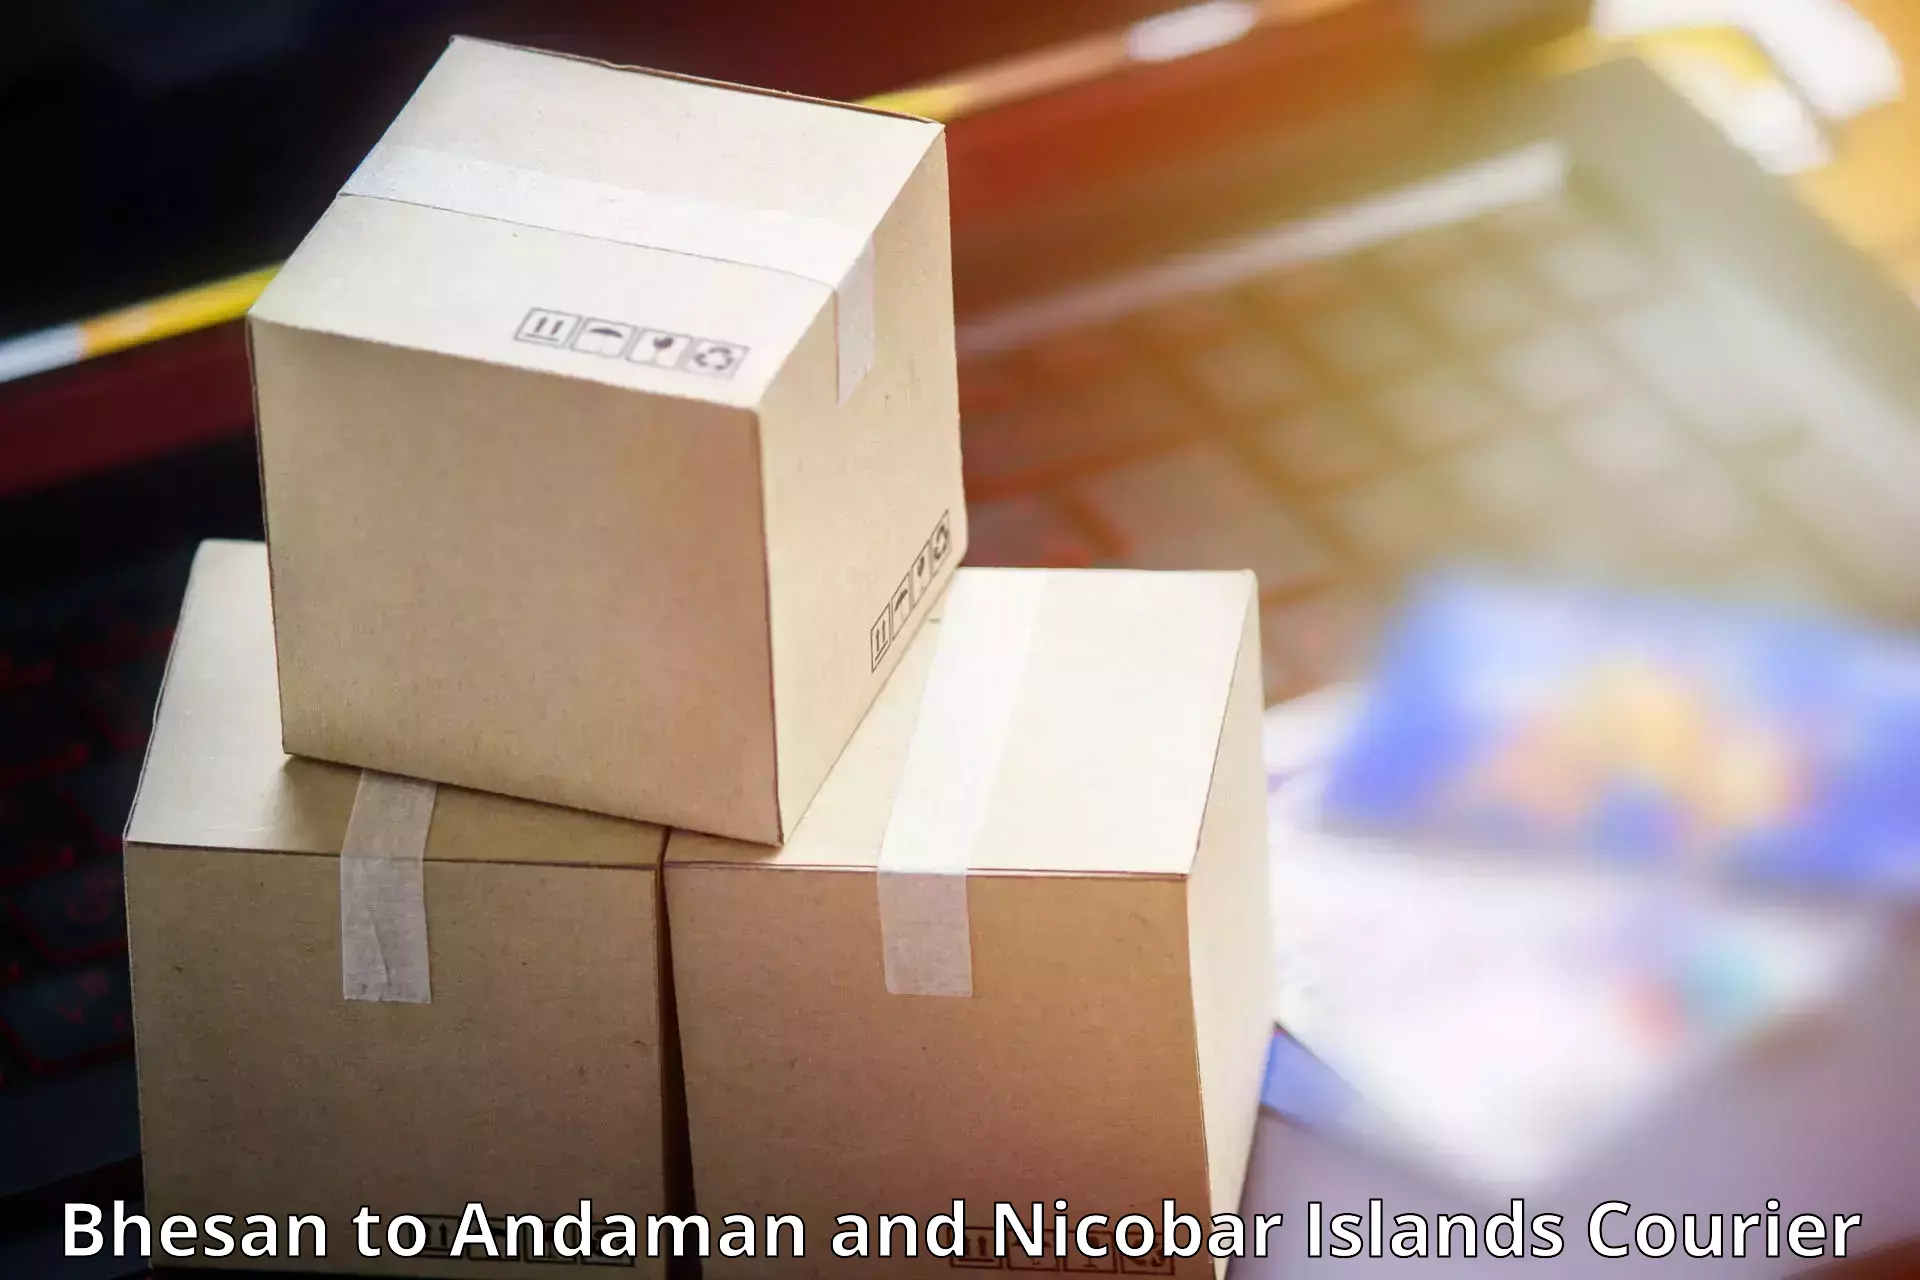 Affordable parcel service in Bhesan to Andaman and Nicobar Islands